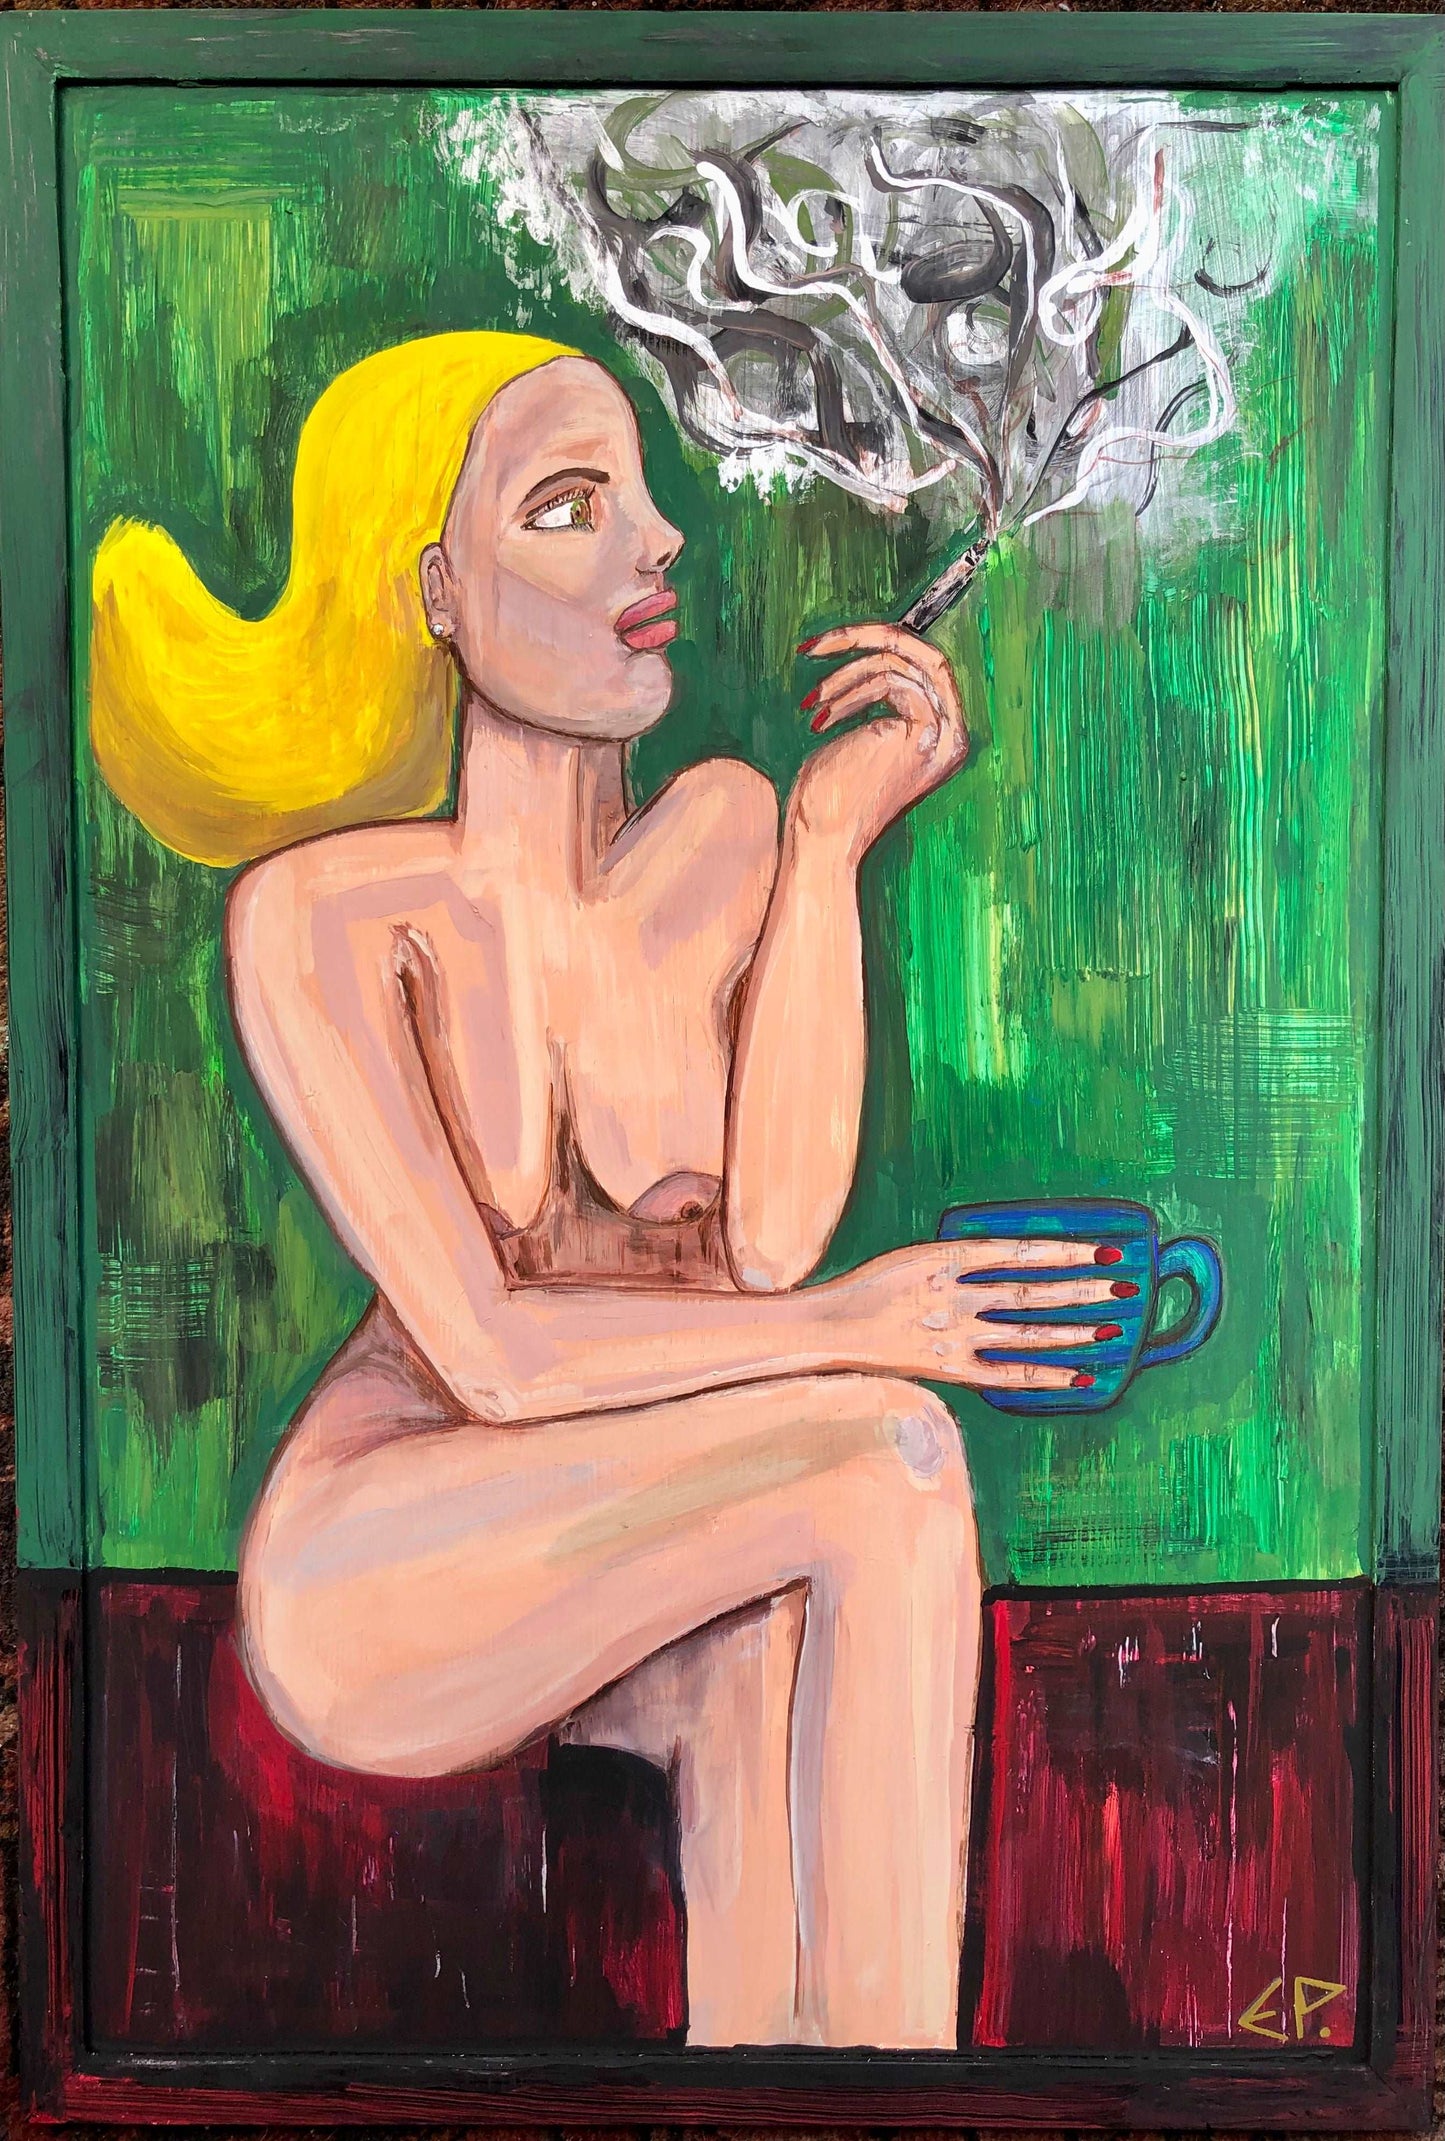 Girl Next Door - Large Framed Naked Blonde Woman Smoking, Original Painting by Art with Evie